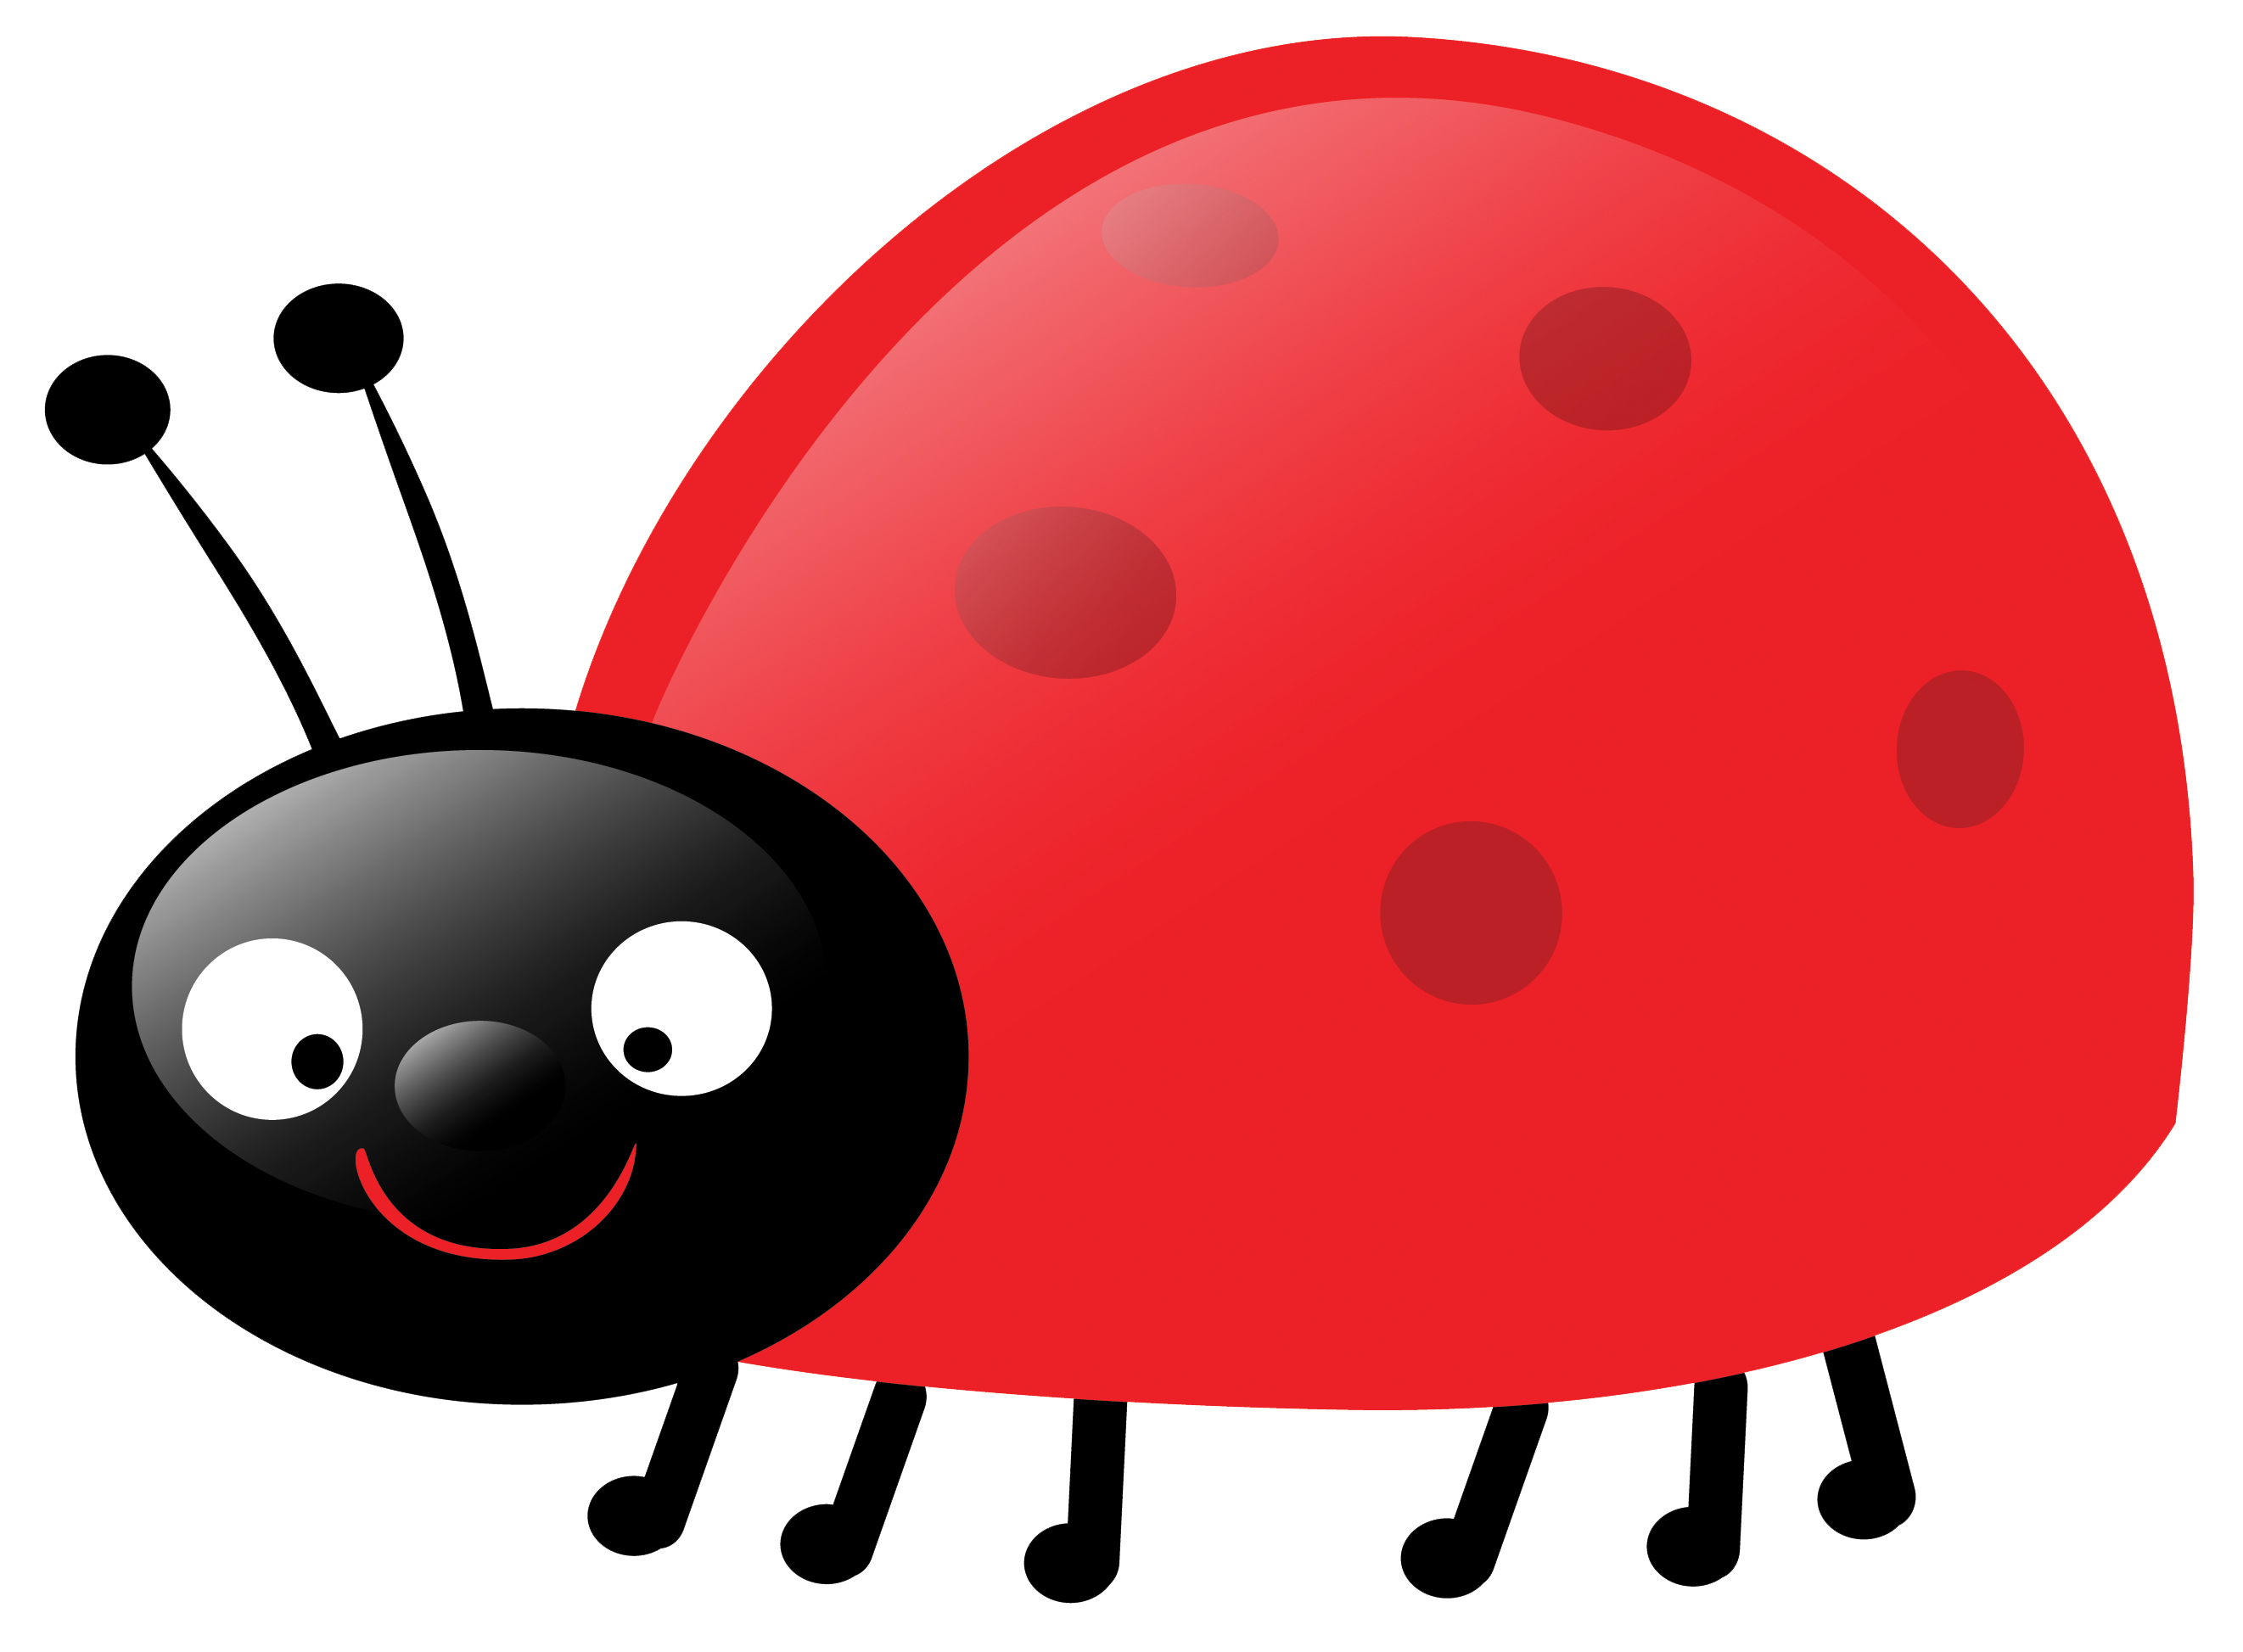 Free Ladybug Clipart - ClipArt Best